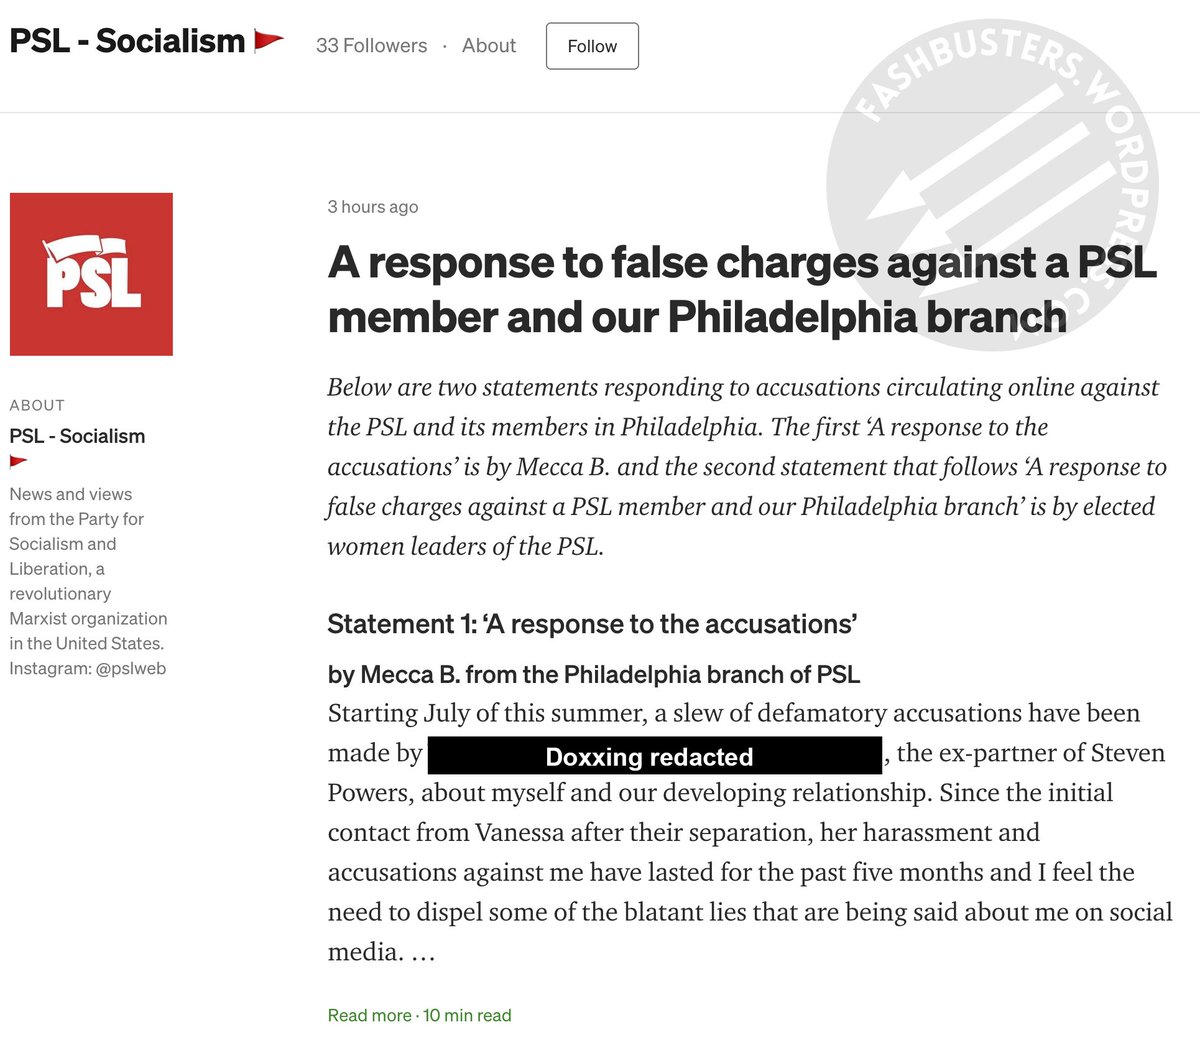 In today's episode of "PSL defends rapist Philadelphia PSL member Steven Powers," PSL created a Medium account just to doxx the survivor. https://fashbusters.wordpress.com/2020/10/17/party-for-socialism-and-liberation-philadelphia-metoo-resignation-letter/ https://medium.com/@pslweb 